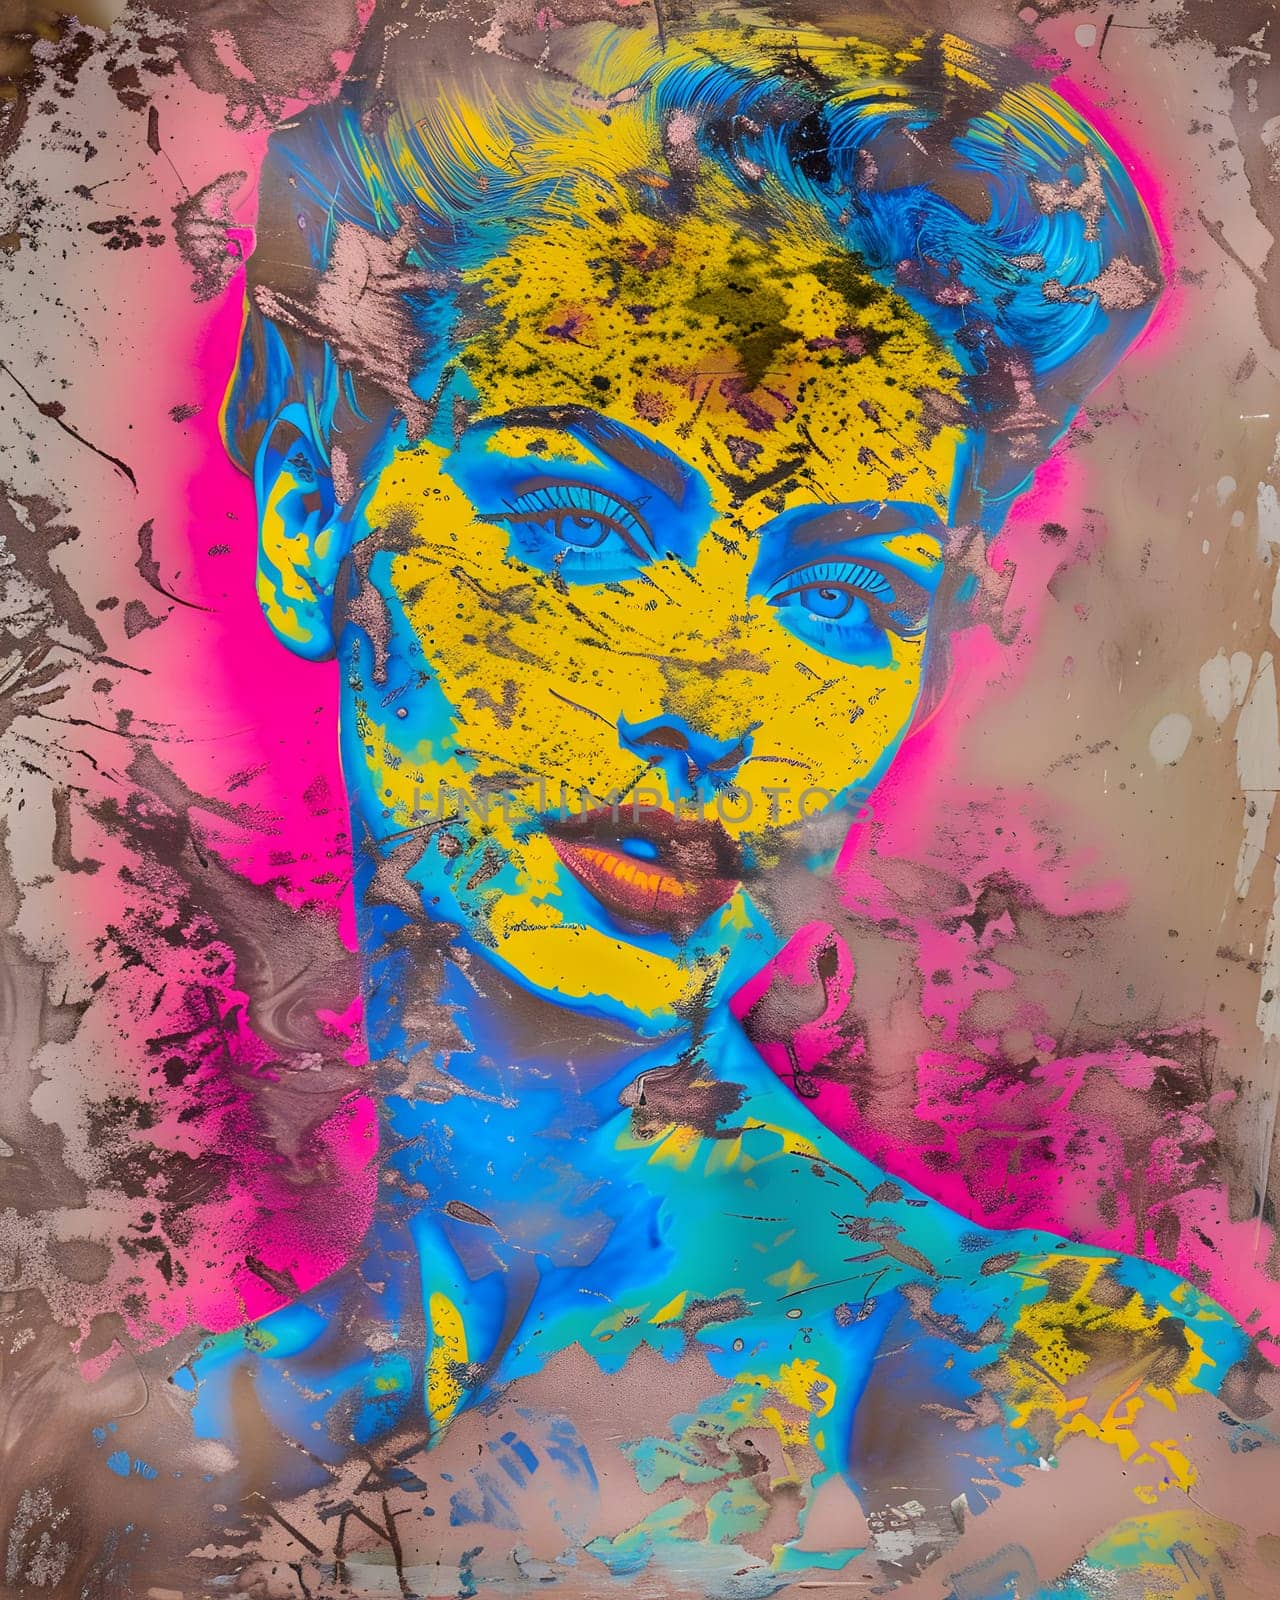 A portrait depicting a woman with yellow and blue paint on her facial features by Nadtochiy